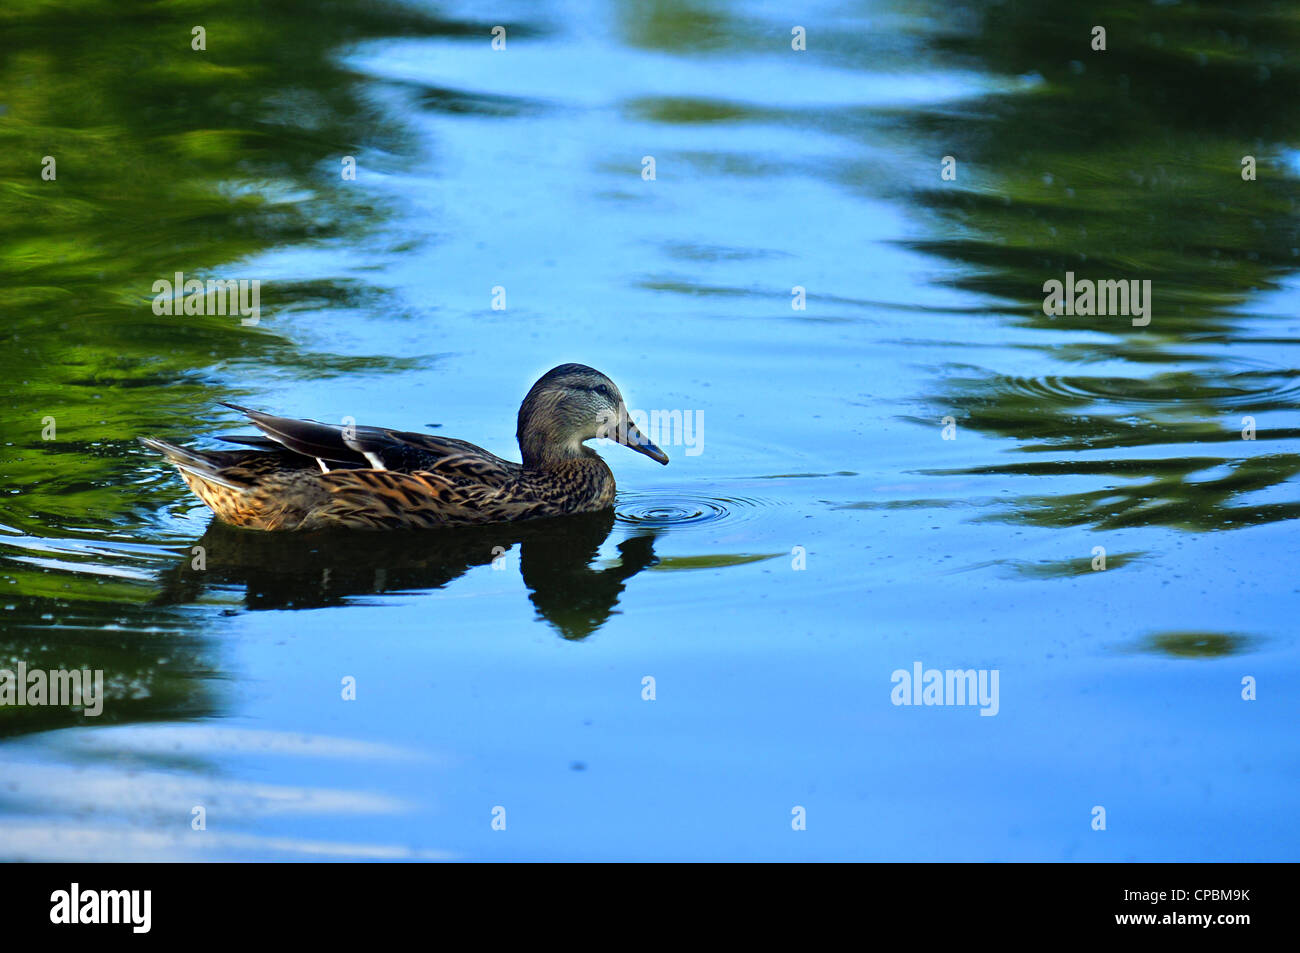 female wood duck swimming in blue and green reflecting pond water Stock Photo